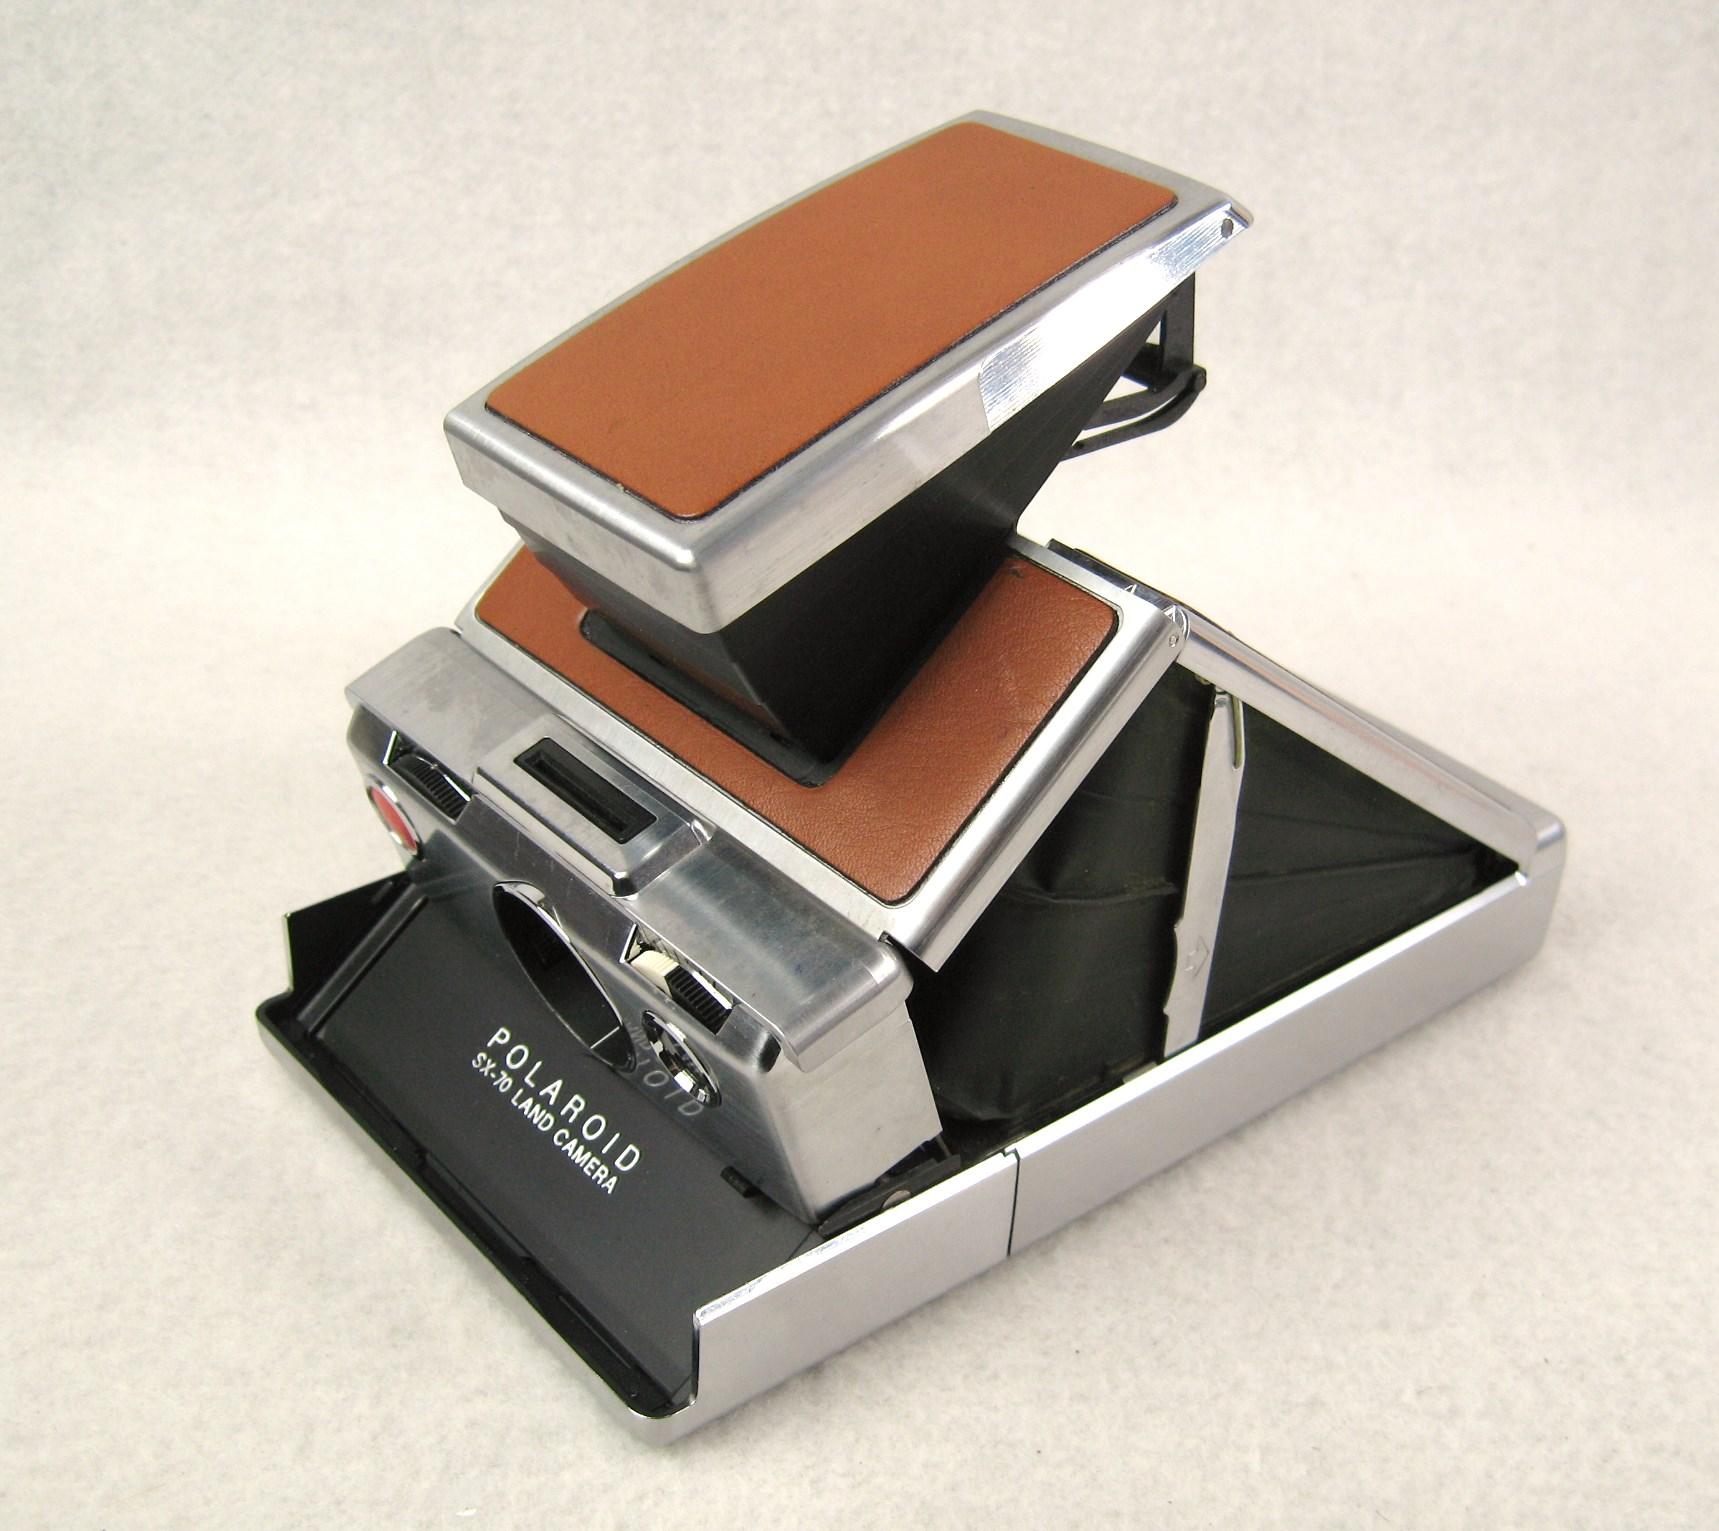 American Vintage Polaroid SX-70 Tan Land Camera by Henry Dreyfuss For Sale